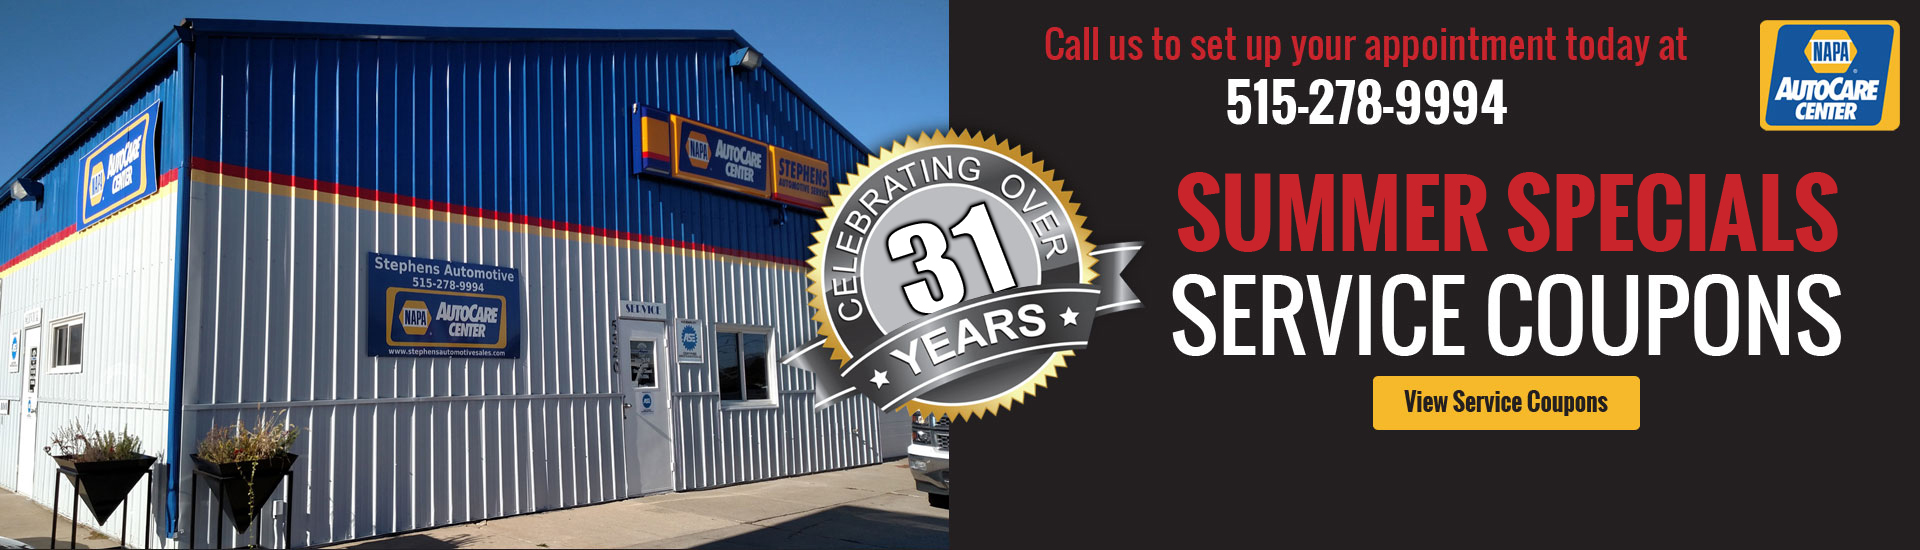 Summer Specials Service Coupons - Stephens Automotive Sales